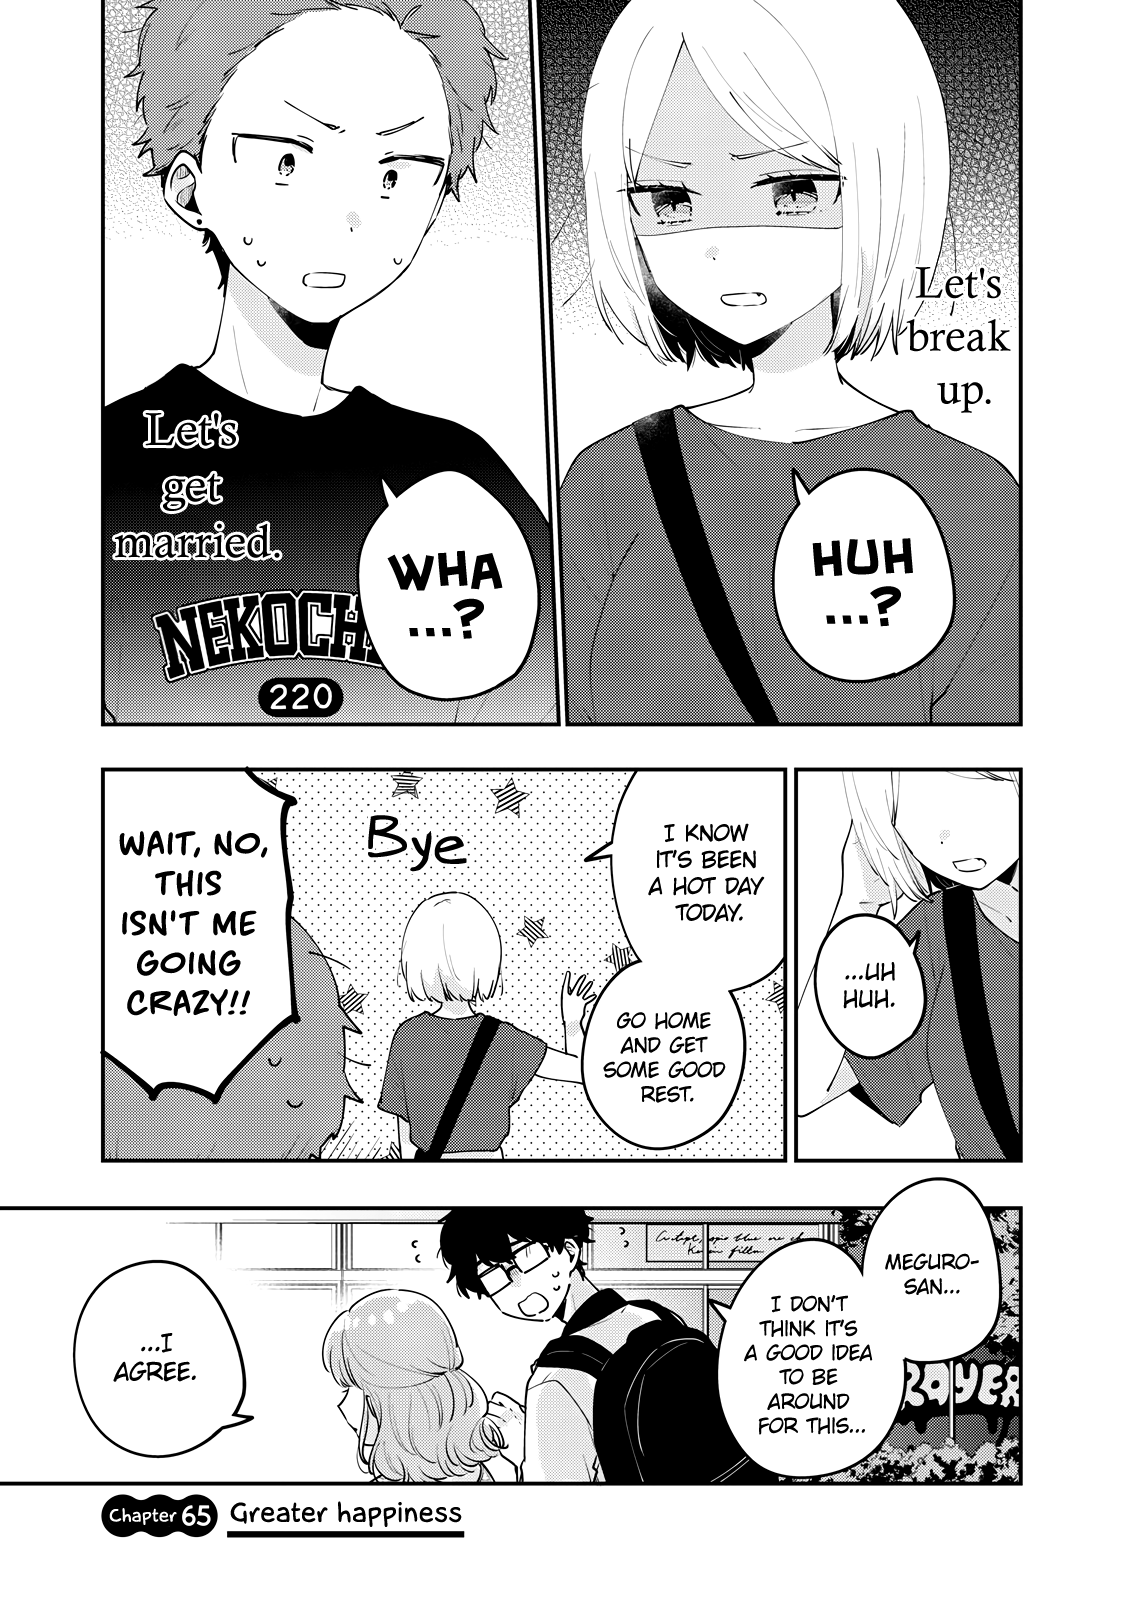 It's Not Meguro-san's First Time chapter 65 page 2